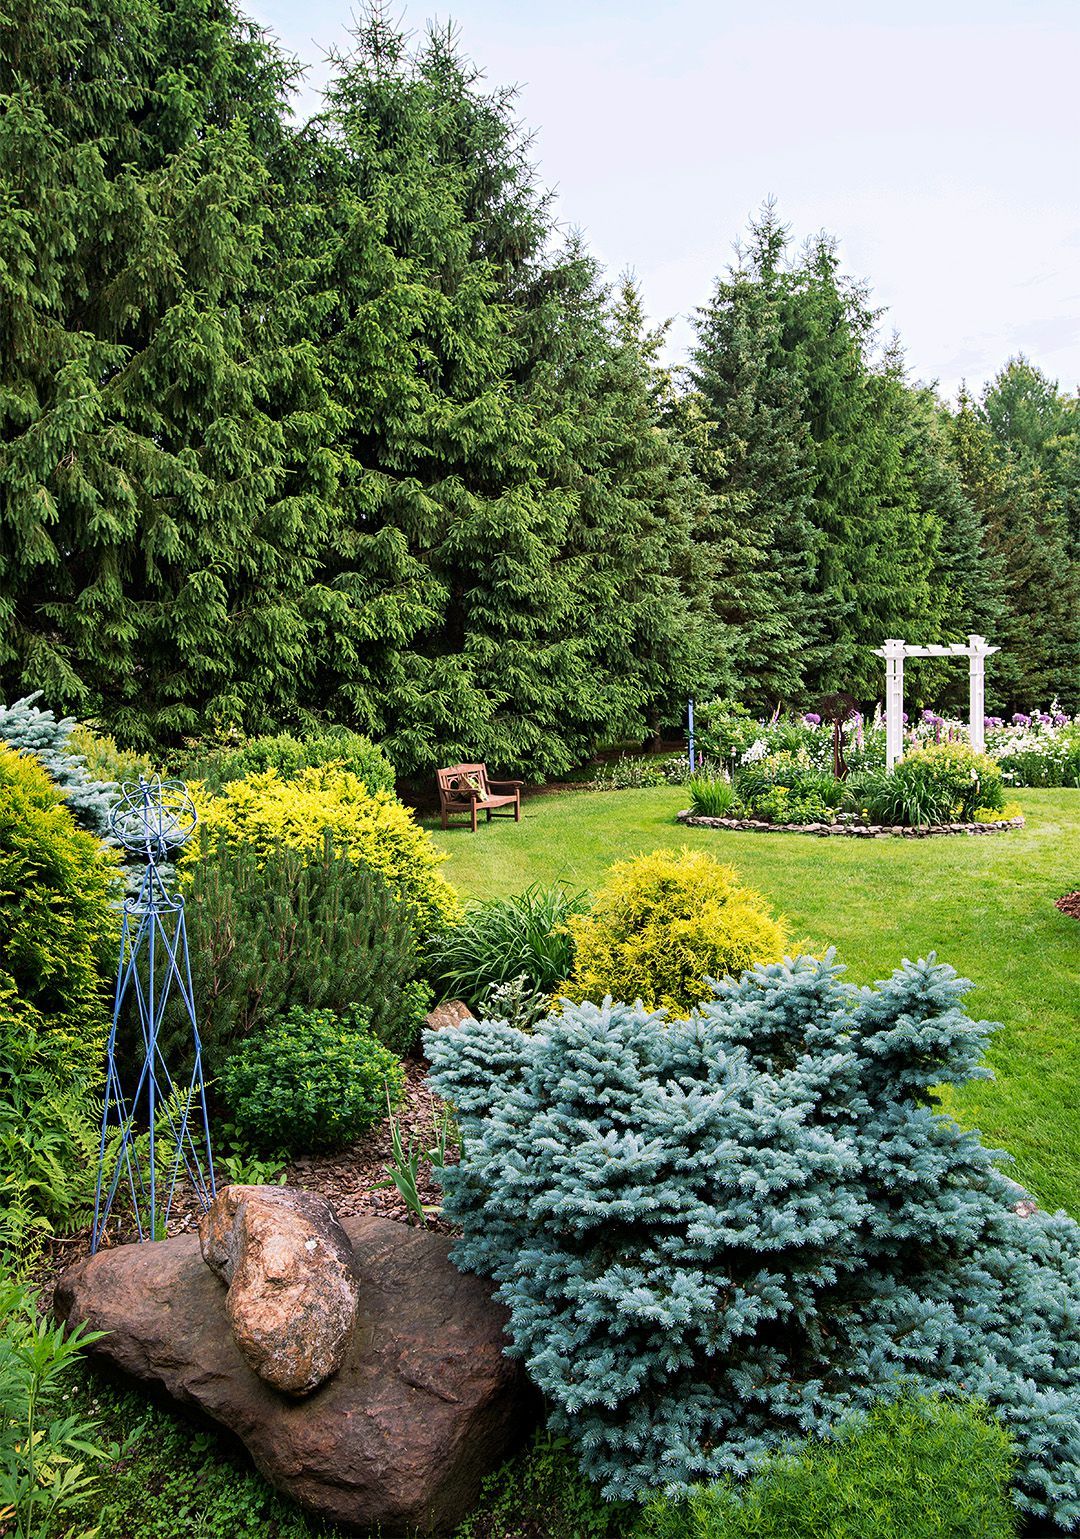 Sustainable Landscaping: The Beauty and Benefits of Evergreen Plants